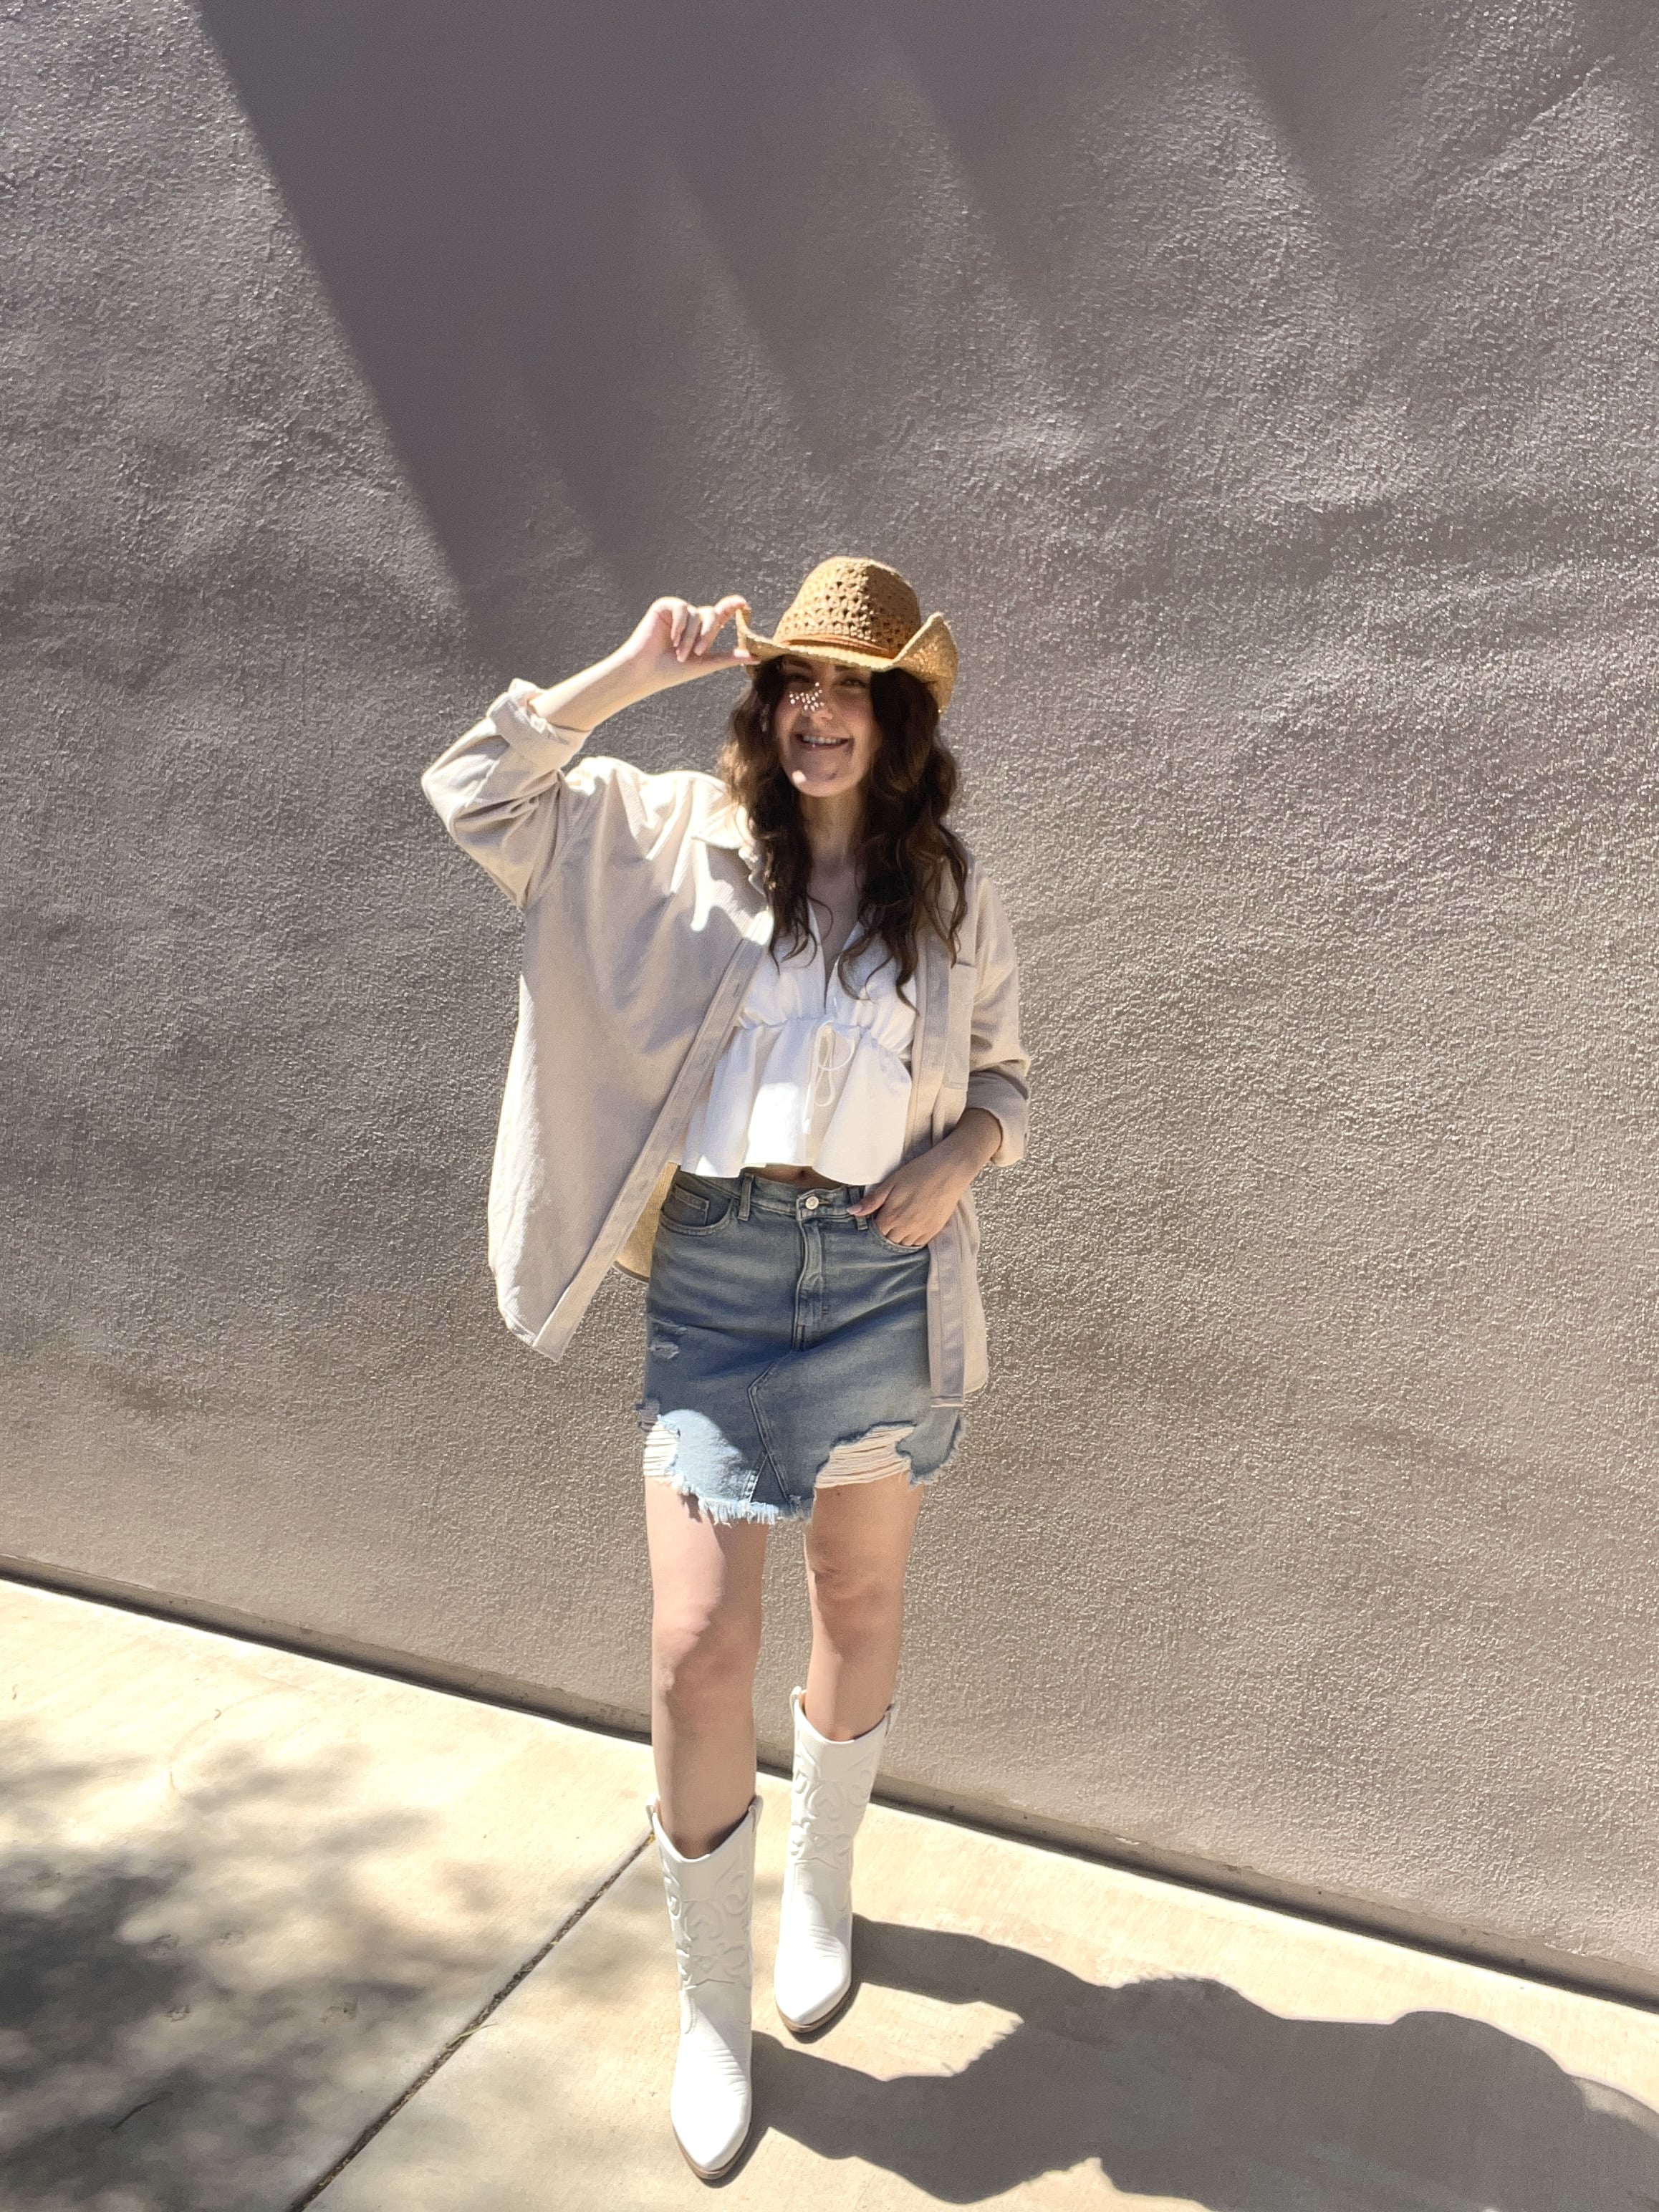 How To Wear Cowboy Boots With Any Aesthetic